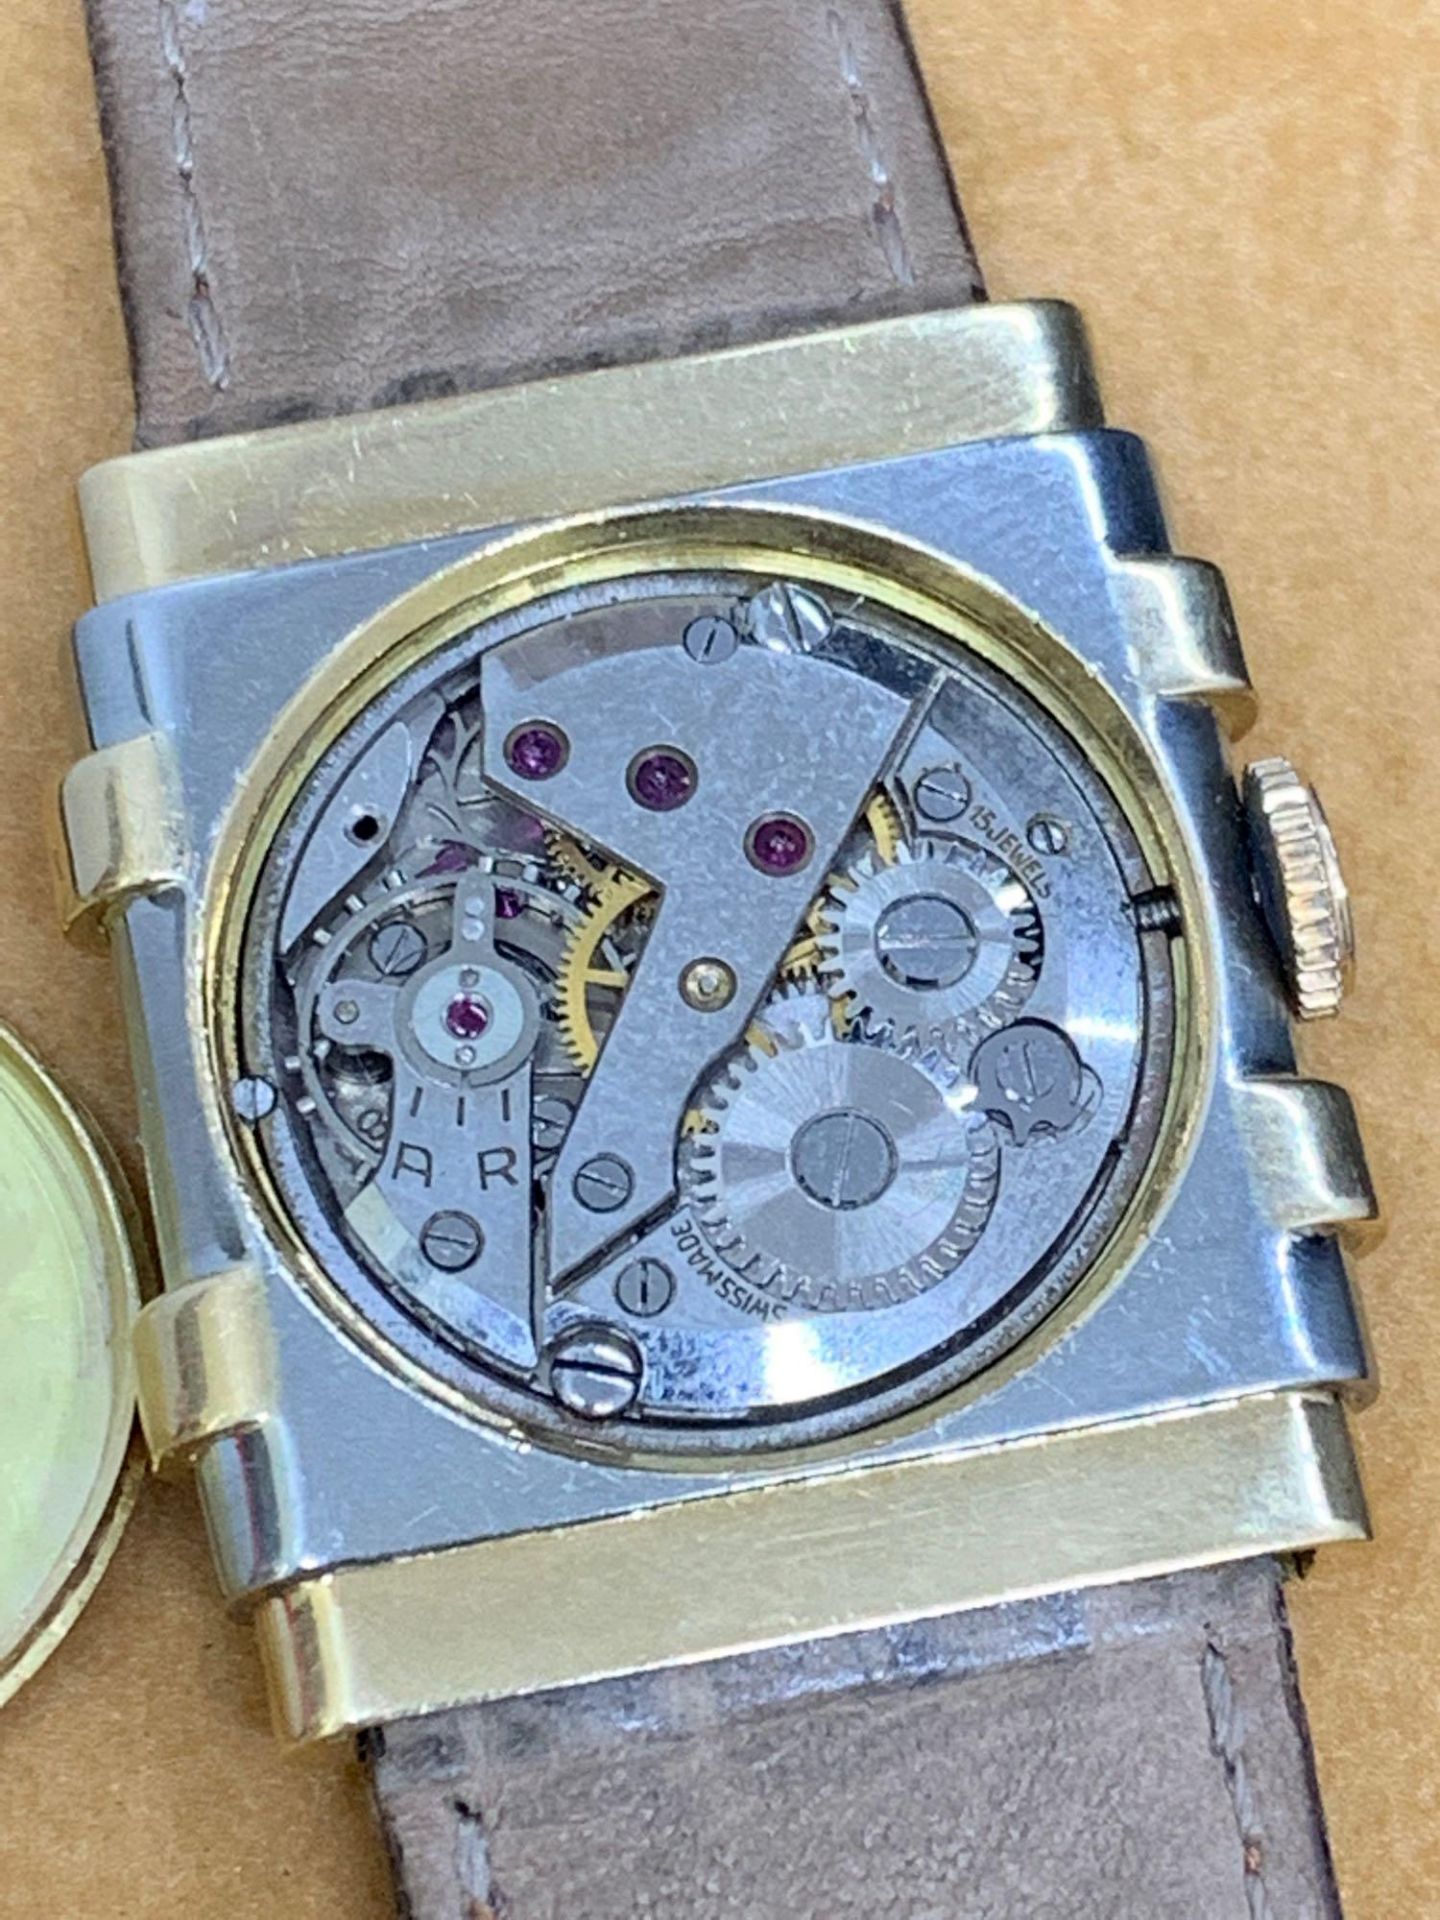 Vacheron & Constantin Gold Coloured Watch Tested as 18ct Gold Movement & Caseback Unsigned - Image 7 of 9